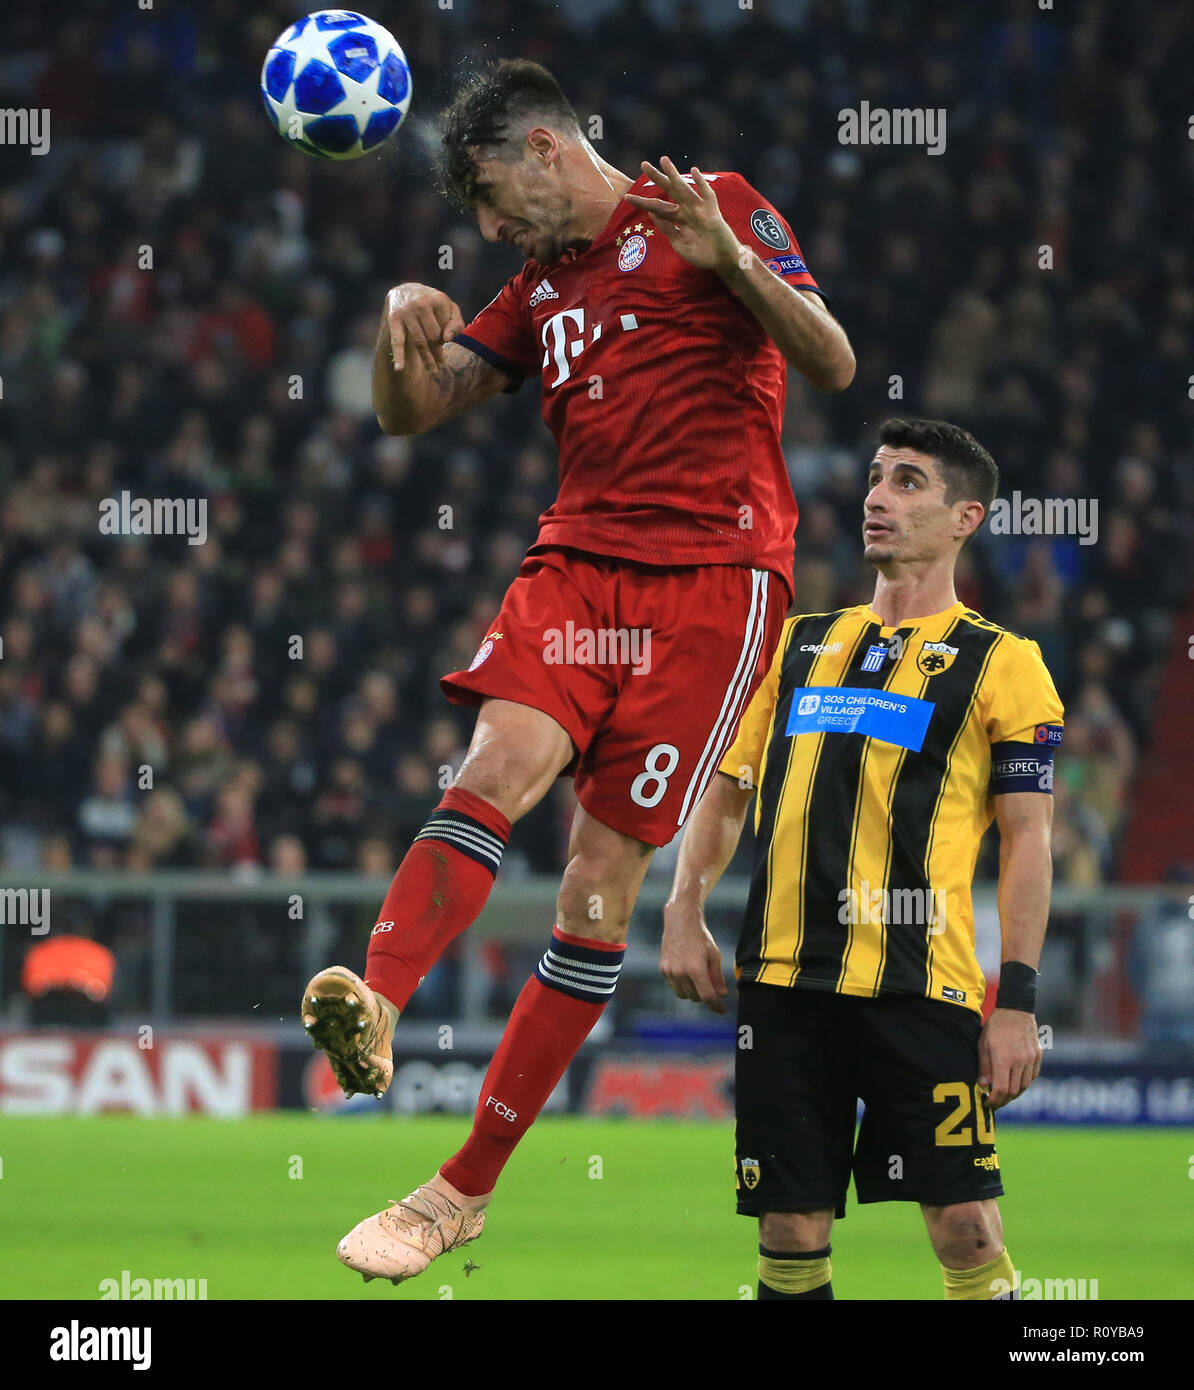 Munich, Germany. 7th Nov, 2018. Bayern Munich's Javi Martinez (top)  competes during a 4th round match of group E in the UEFA Champions League  between Bayern Munich of Germany and AEK Athens